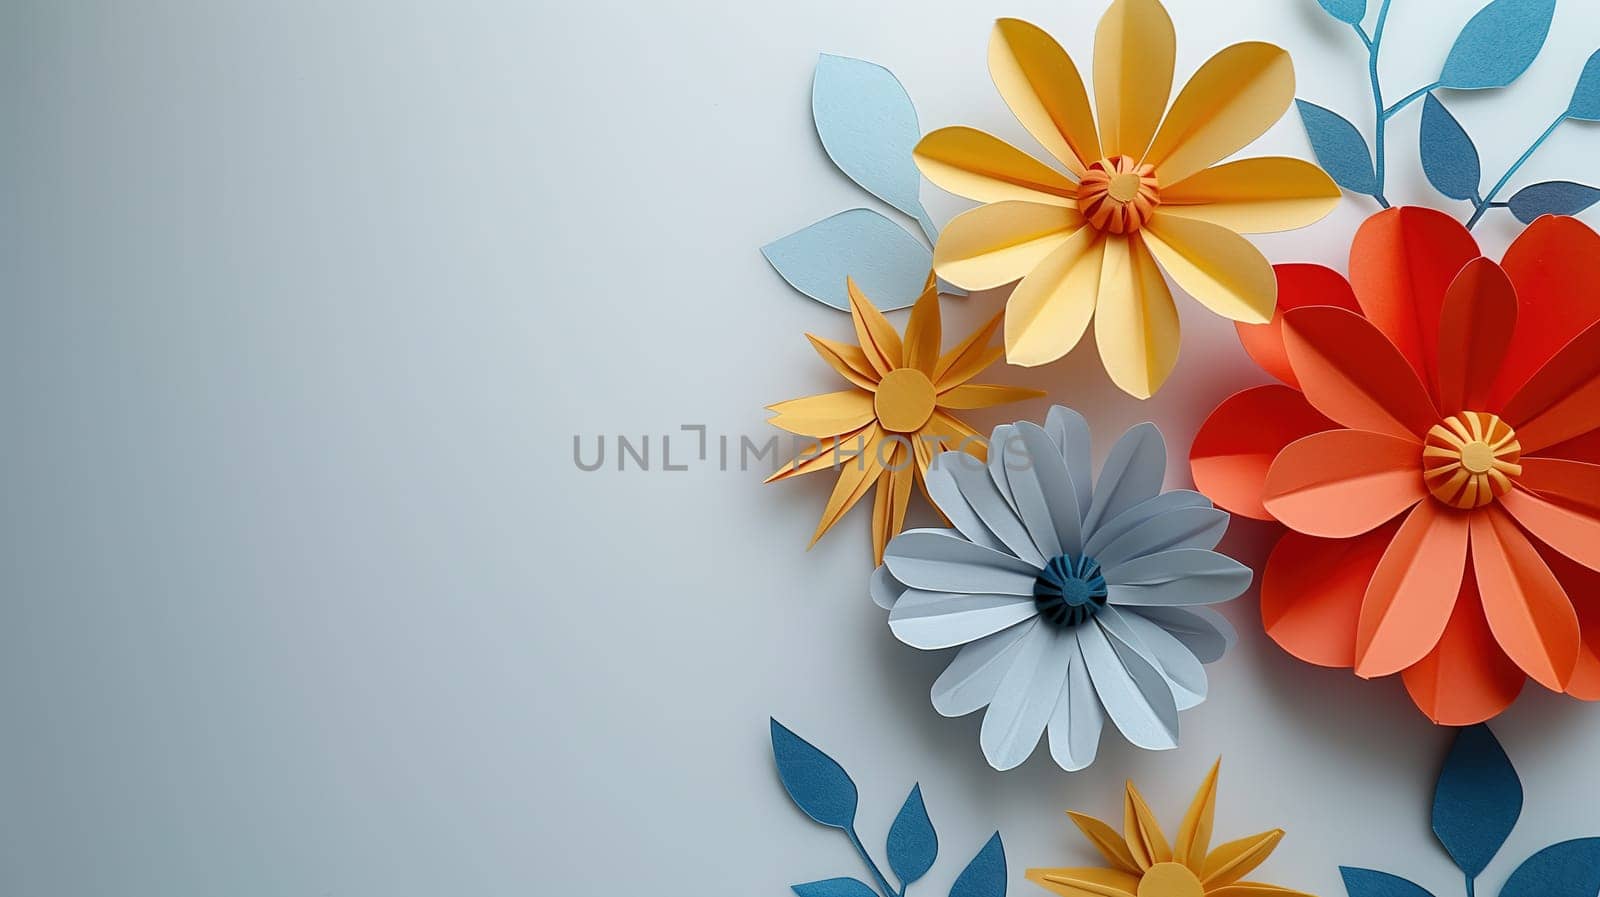 Group of Paper Flowers on a White Surface by TRMK